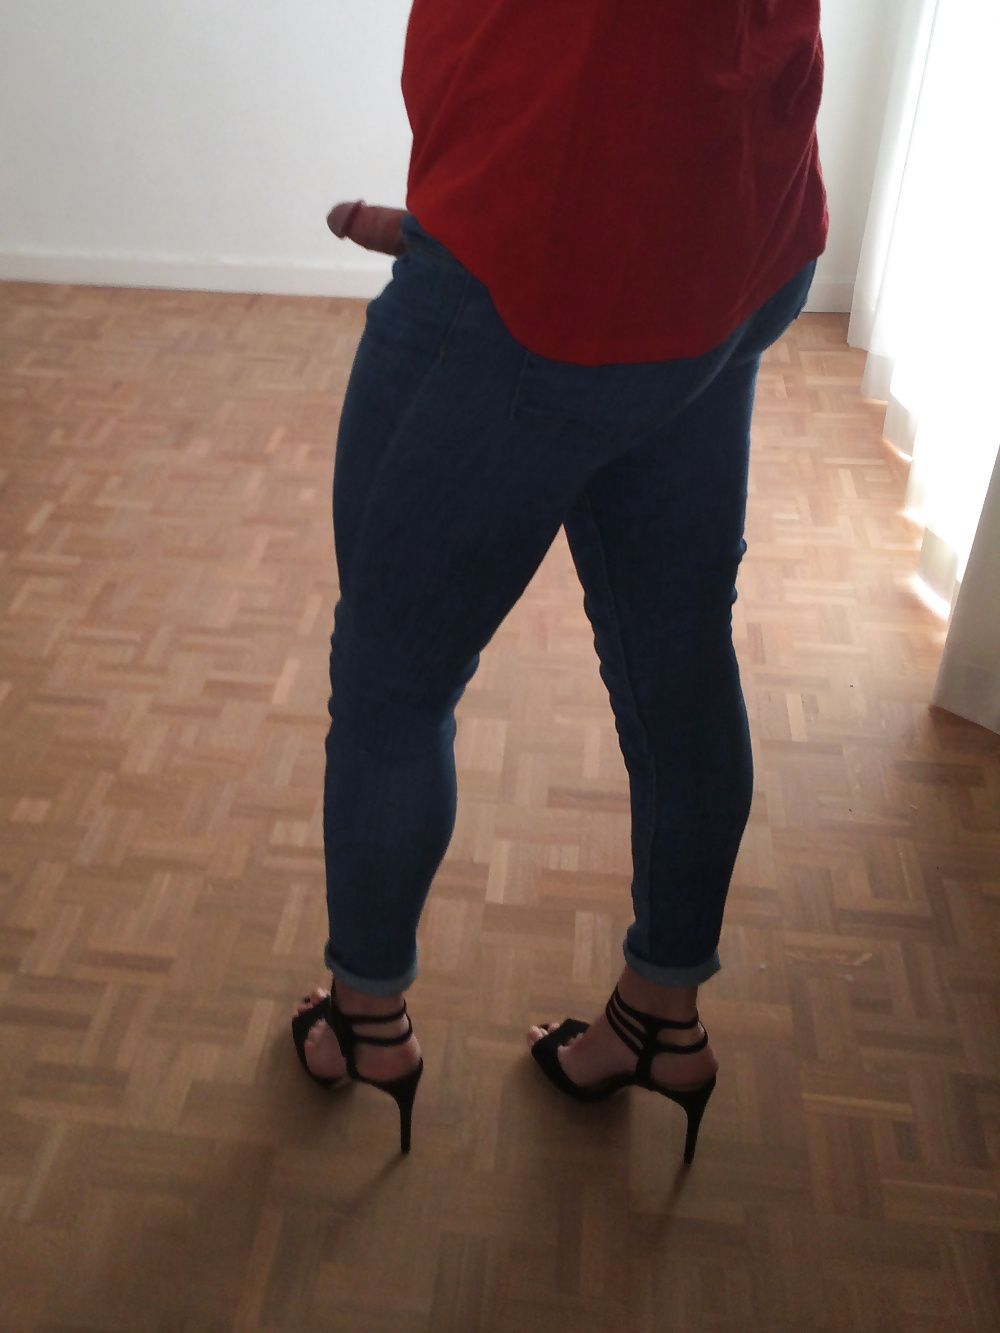 Jeans & red top, whale tail :) #11